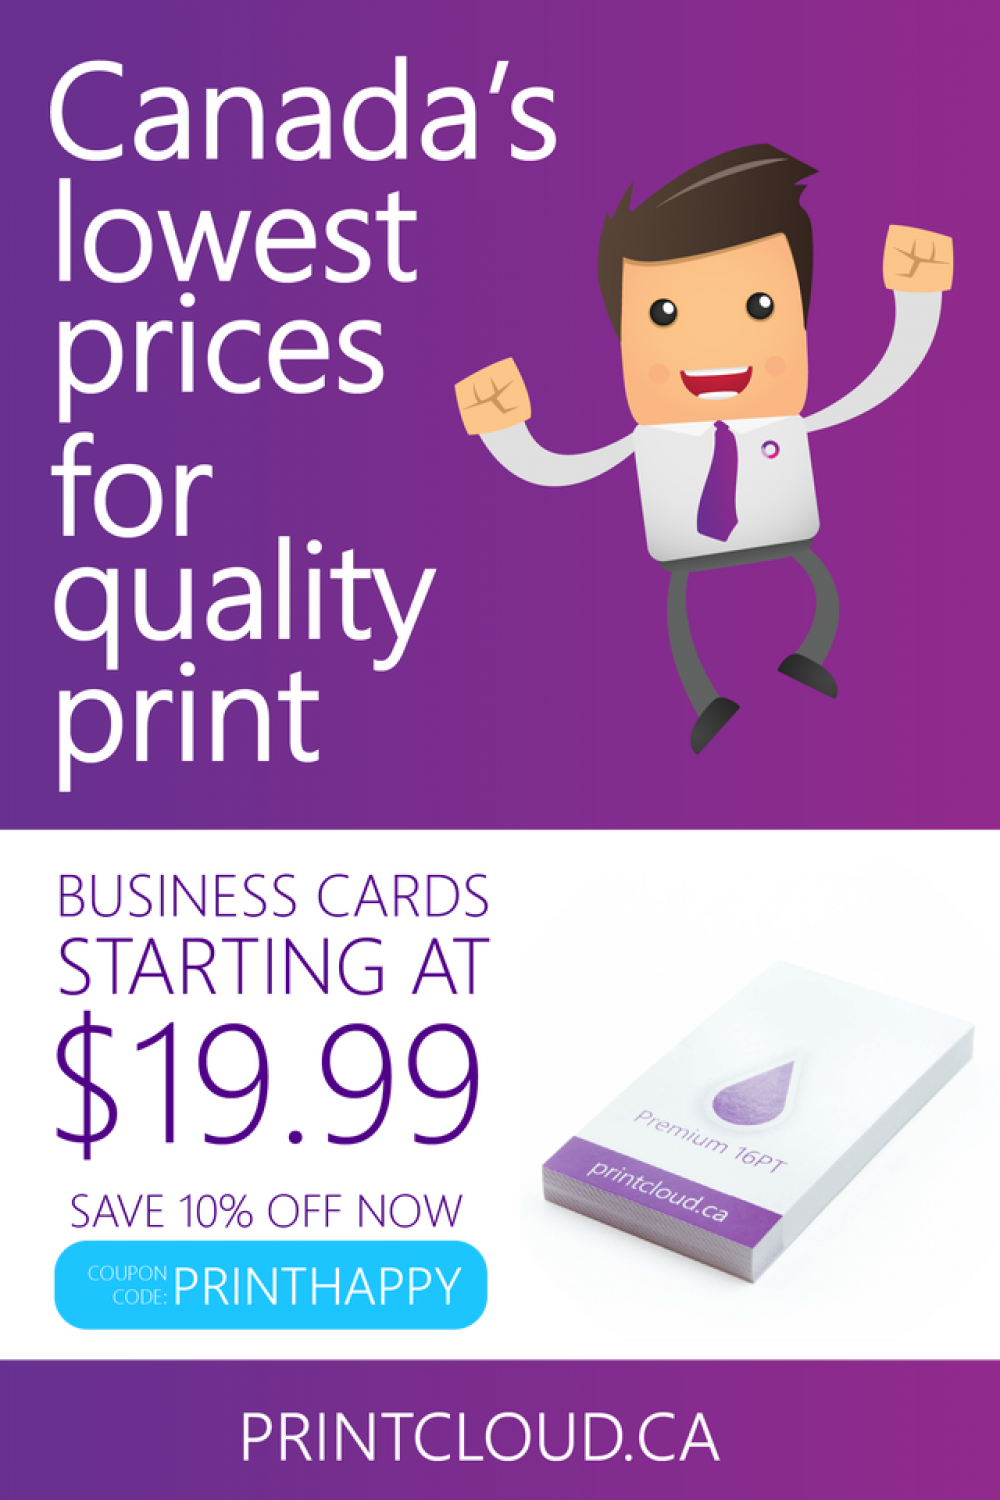 Paper - Canada's Lowest Price for Quality Print